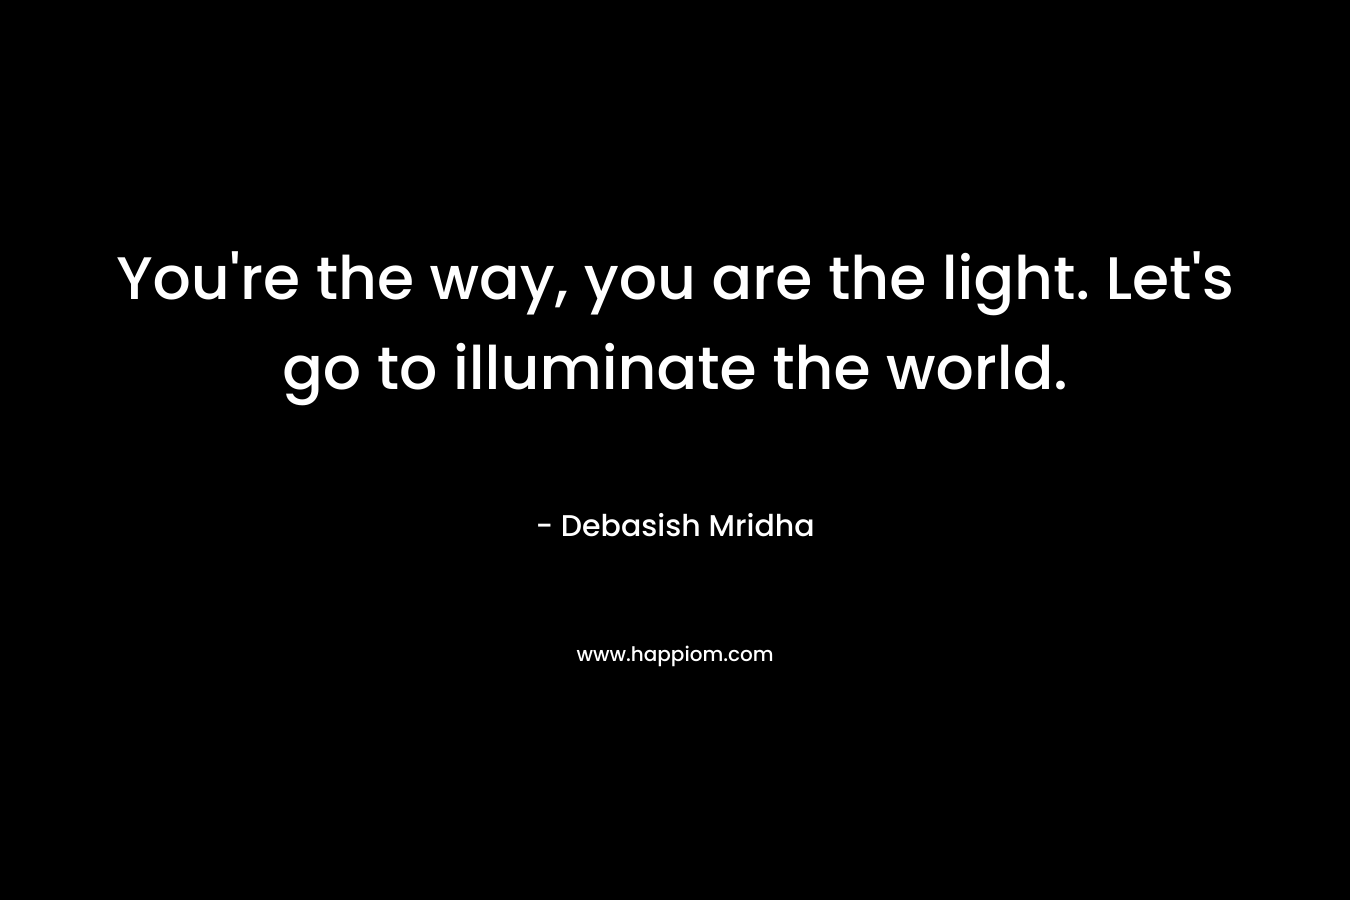 You're the way, you are the light. Let's go to illuminate the world.